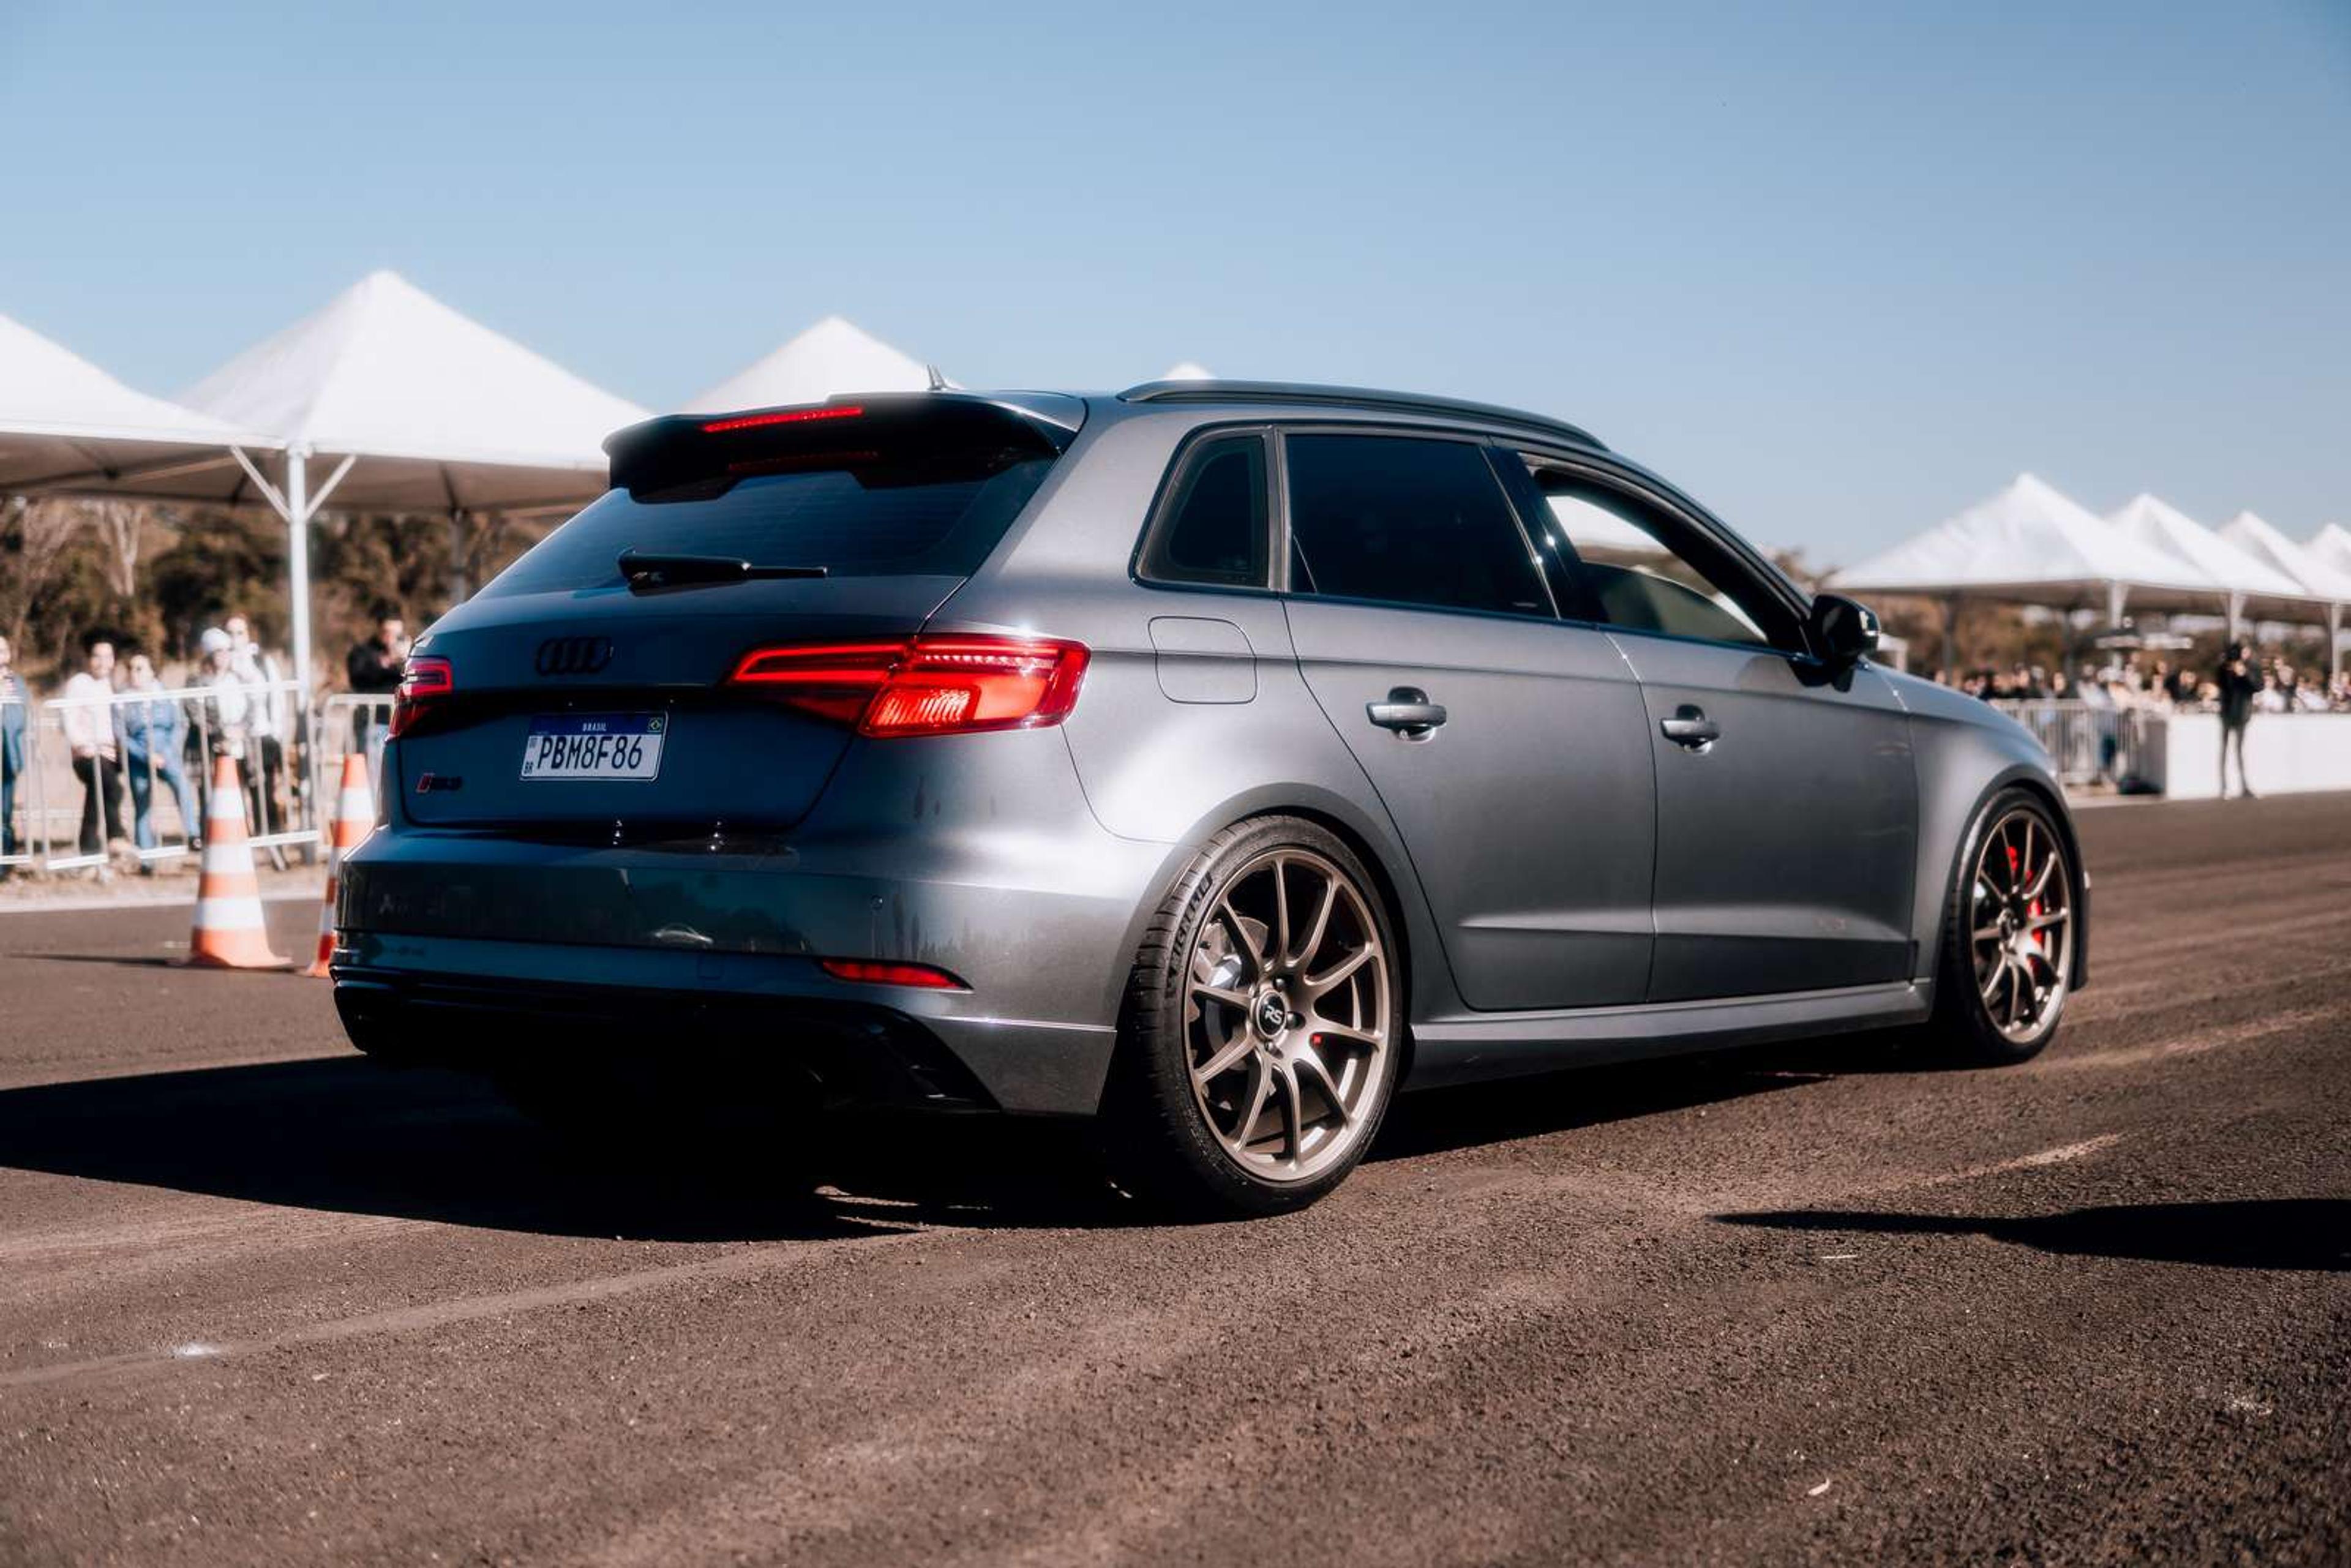 Grey Audi RS3 on a race track